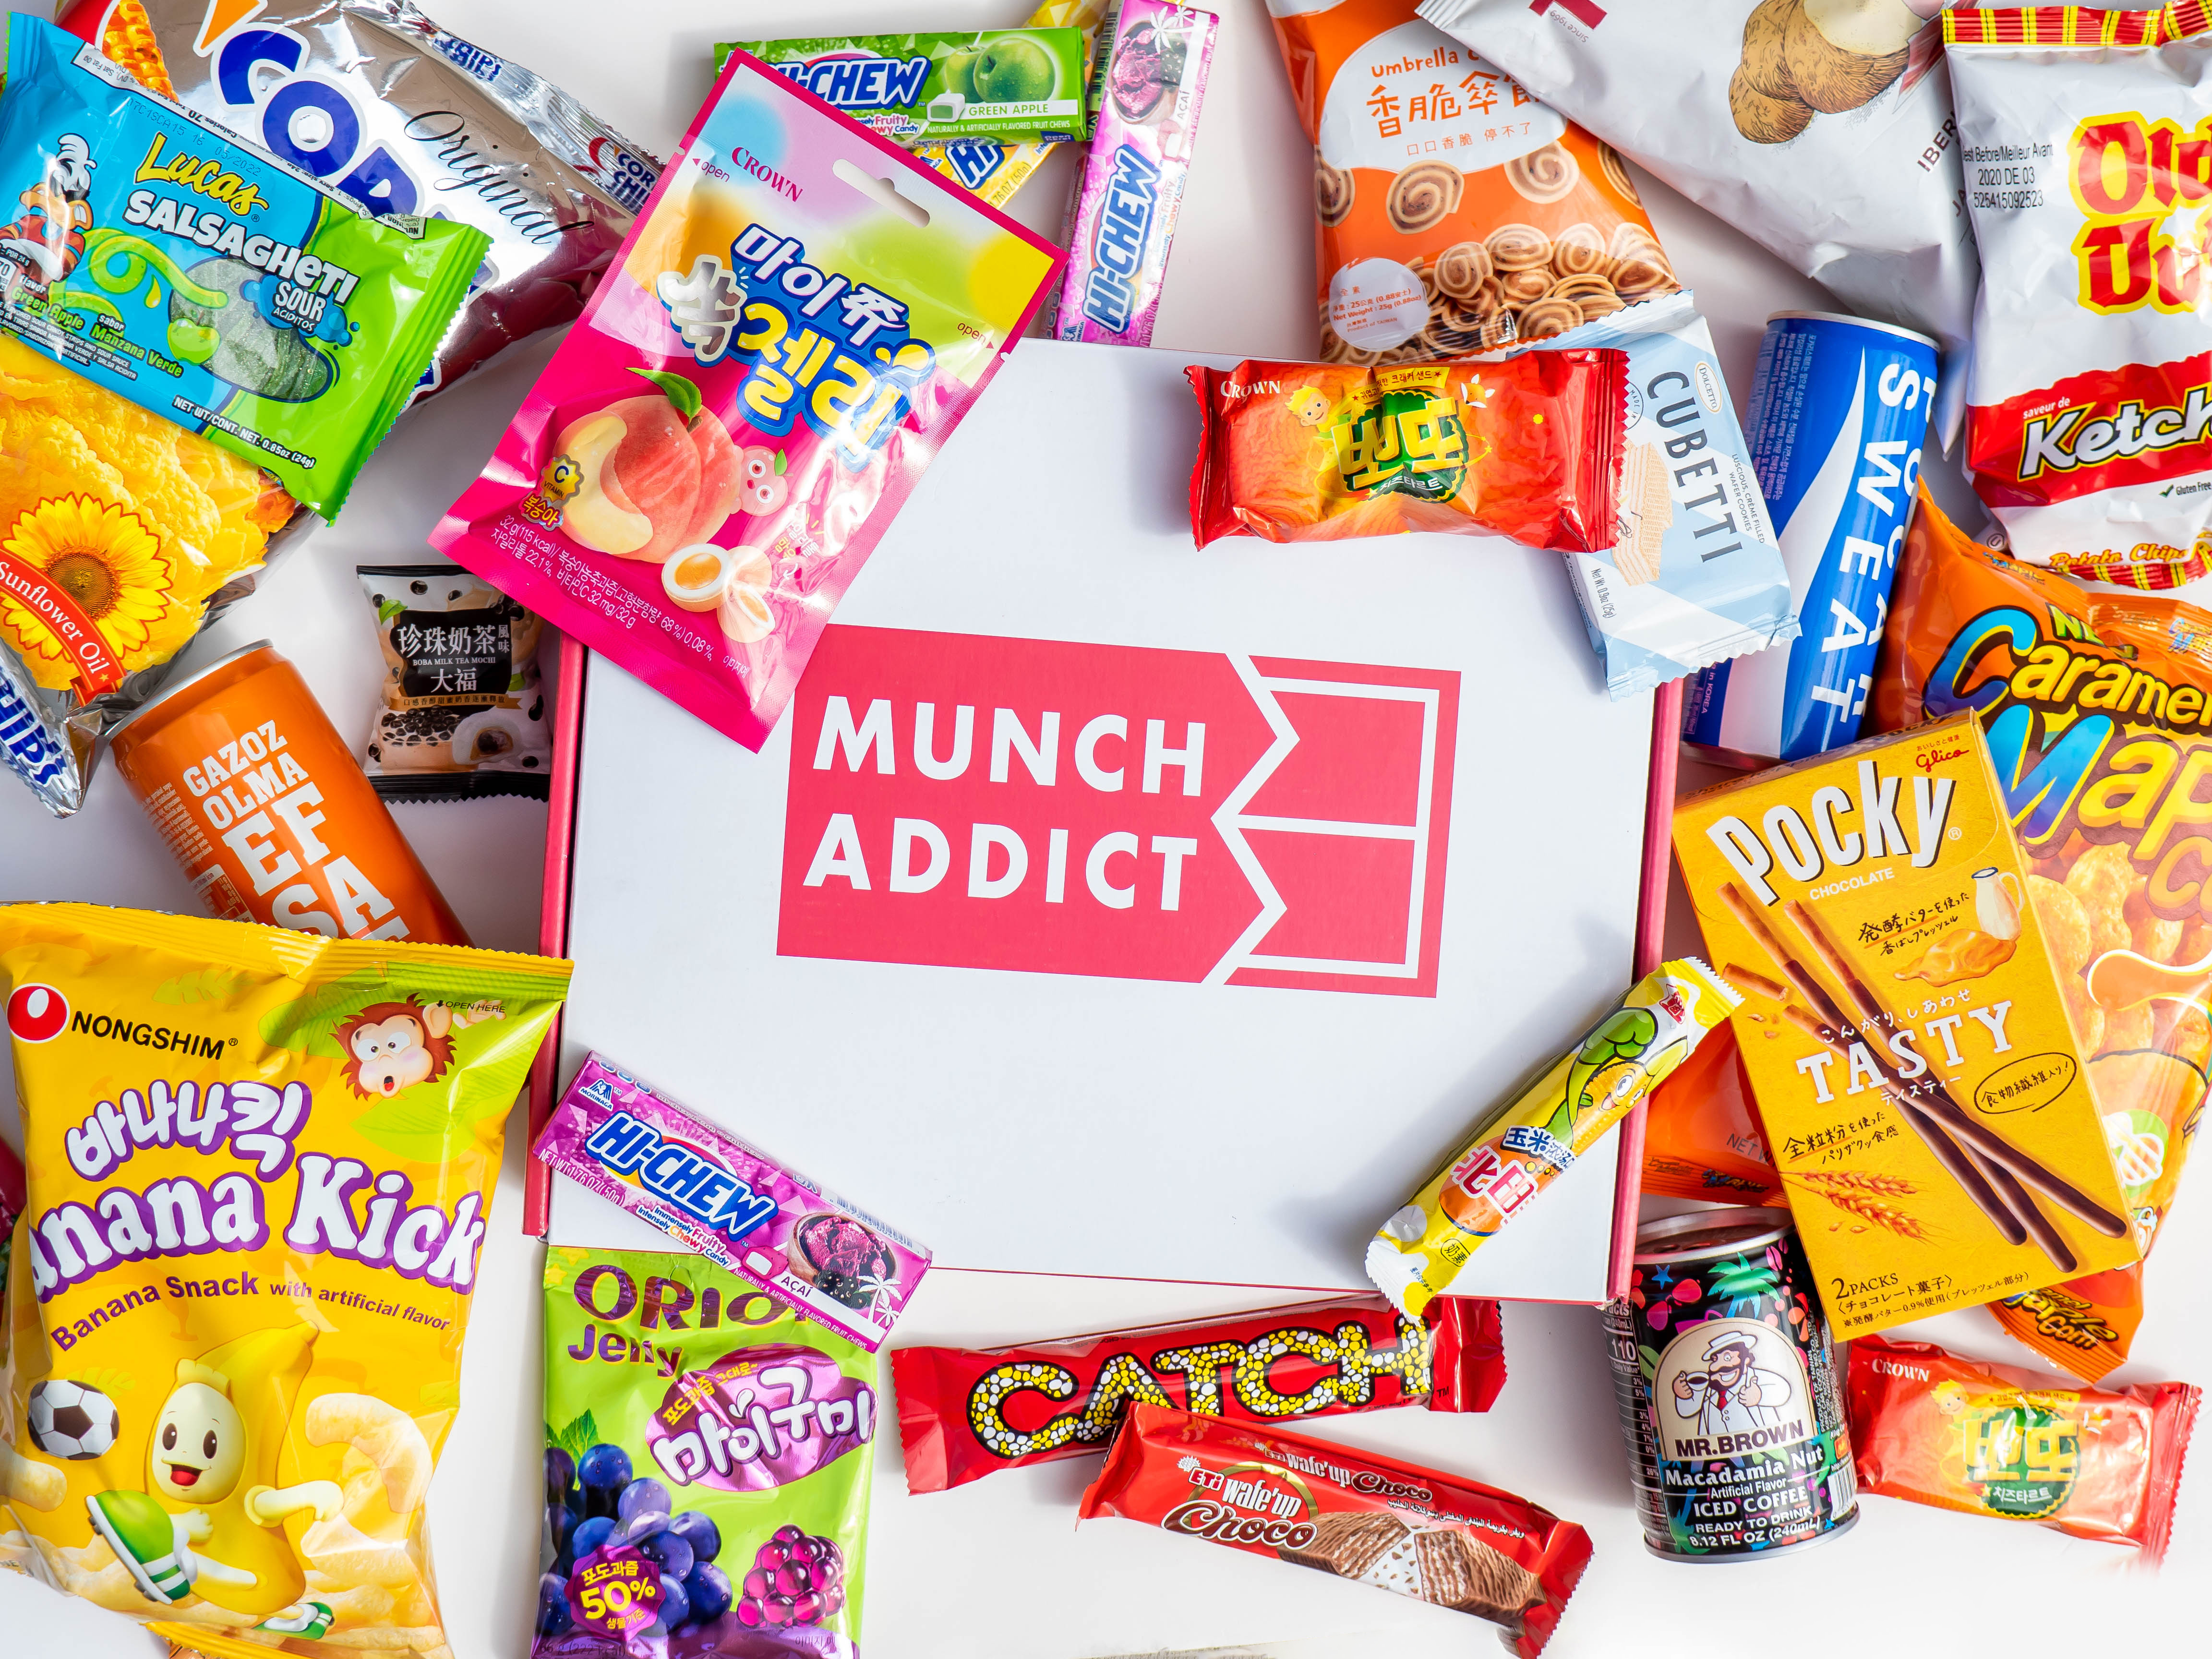 Munch Addict Black Friday 2022 Deal: Up to $100 in Store Credit!